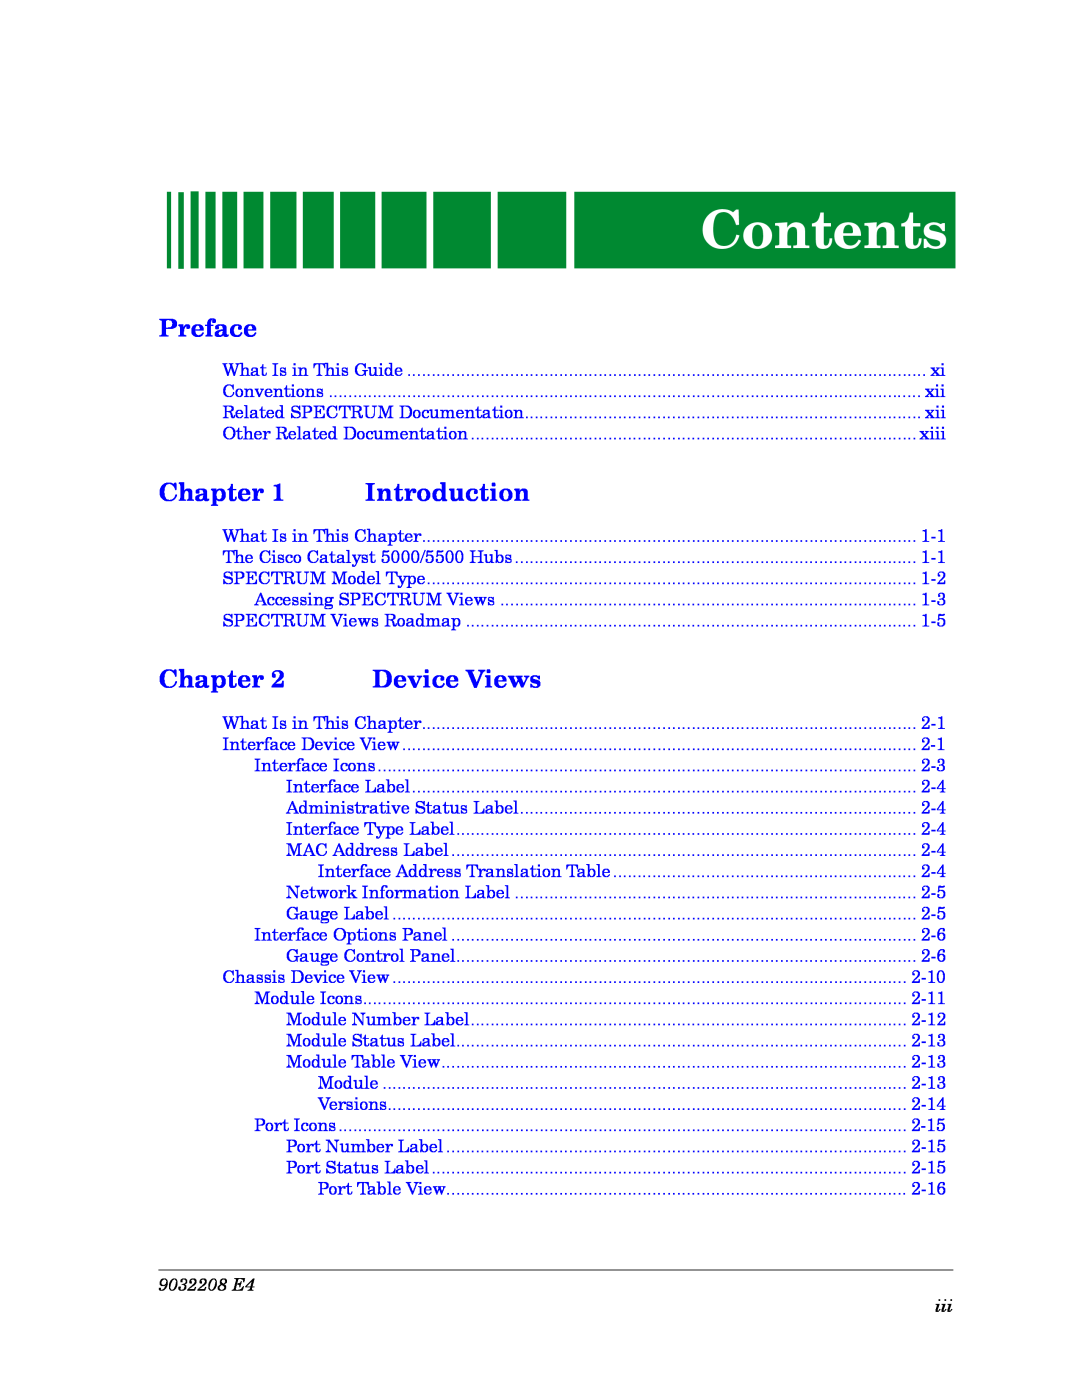 Cabletron Systems 5000, 5500 manual Contents, Preface, Chapter, Introduction, Device Views, 9032208 E4 